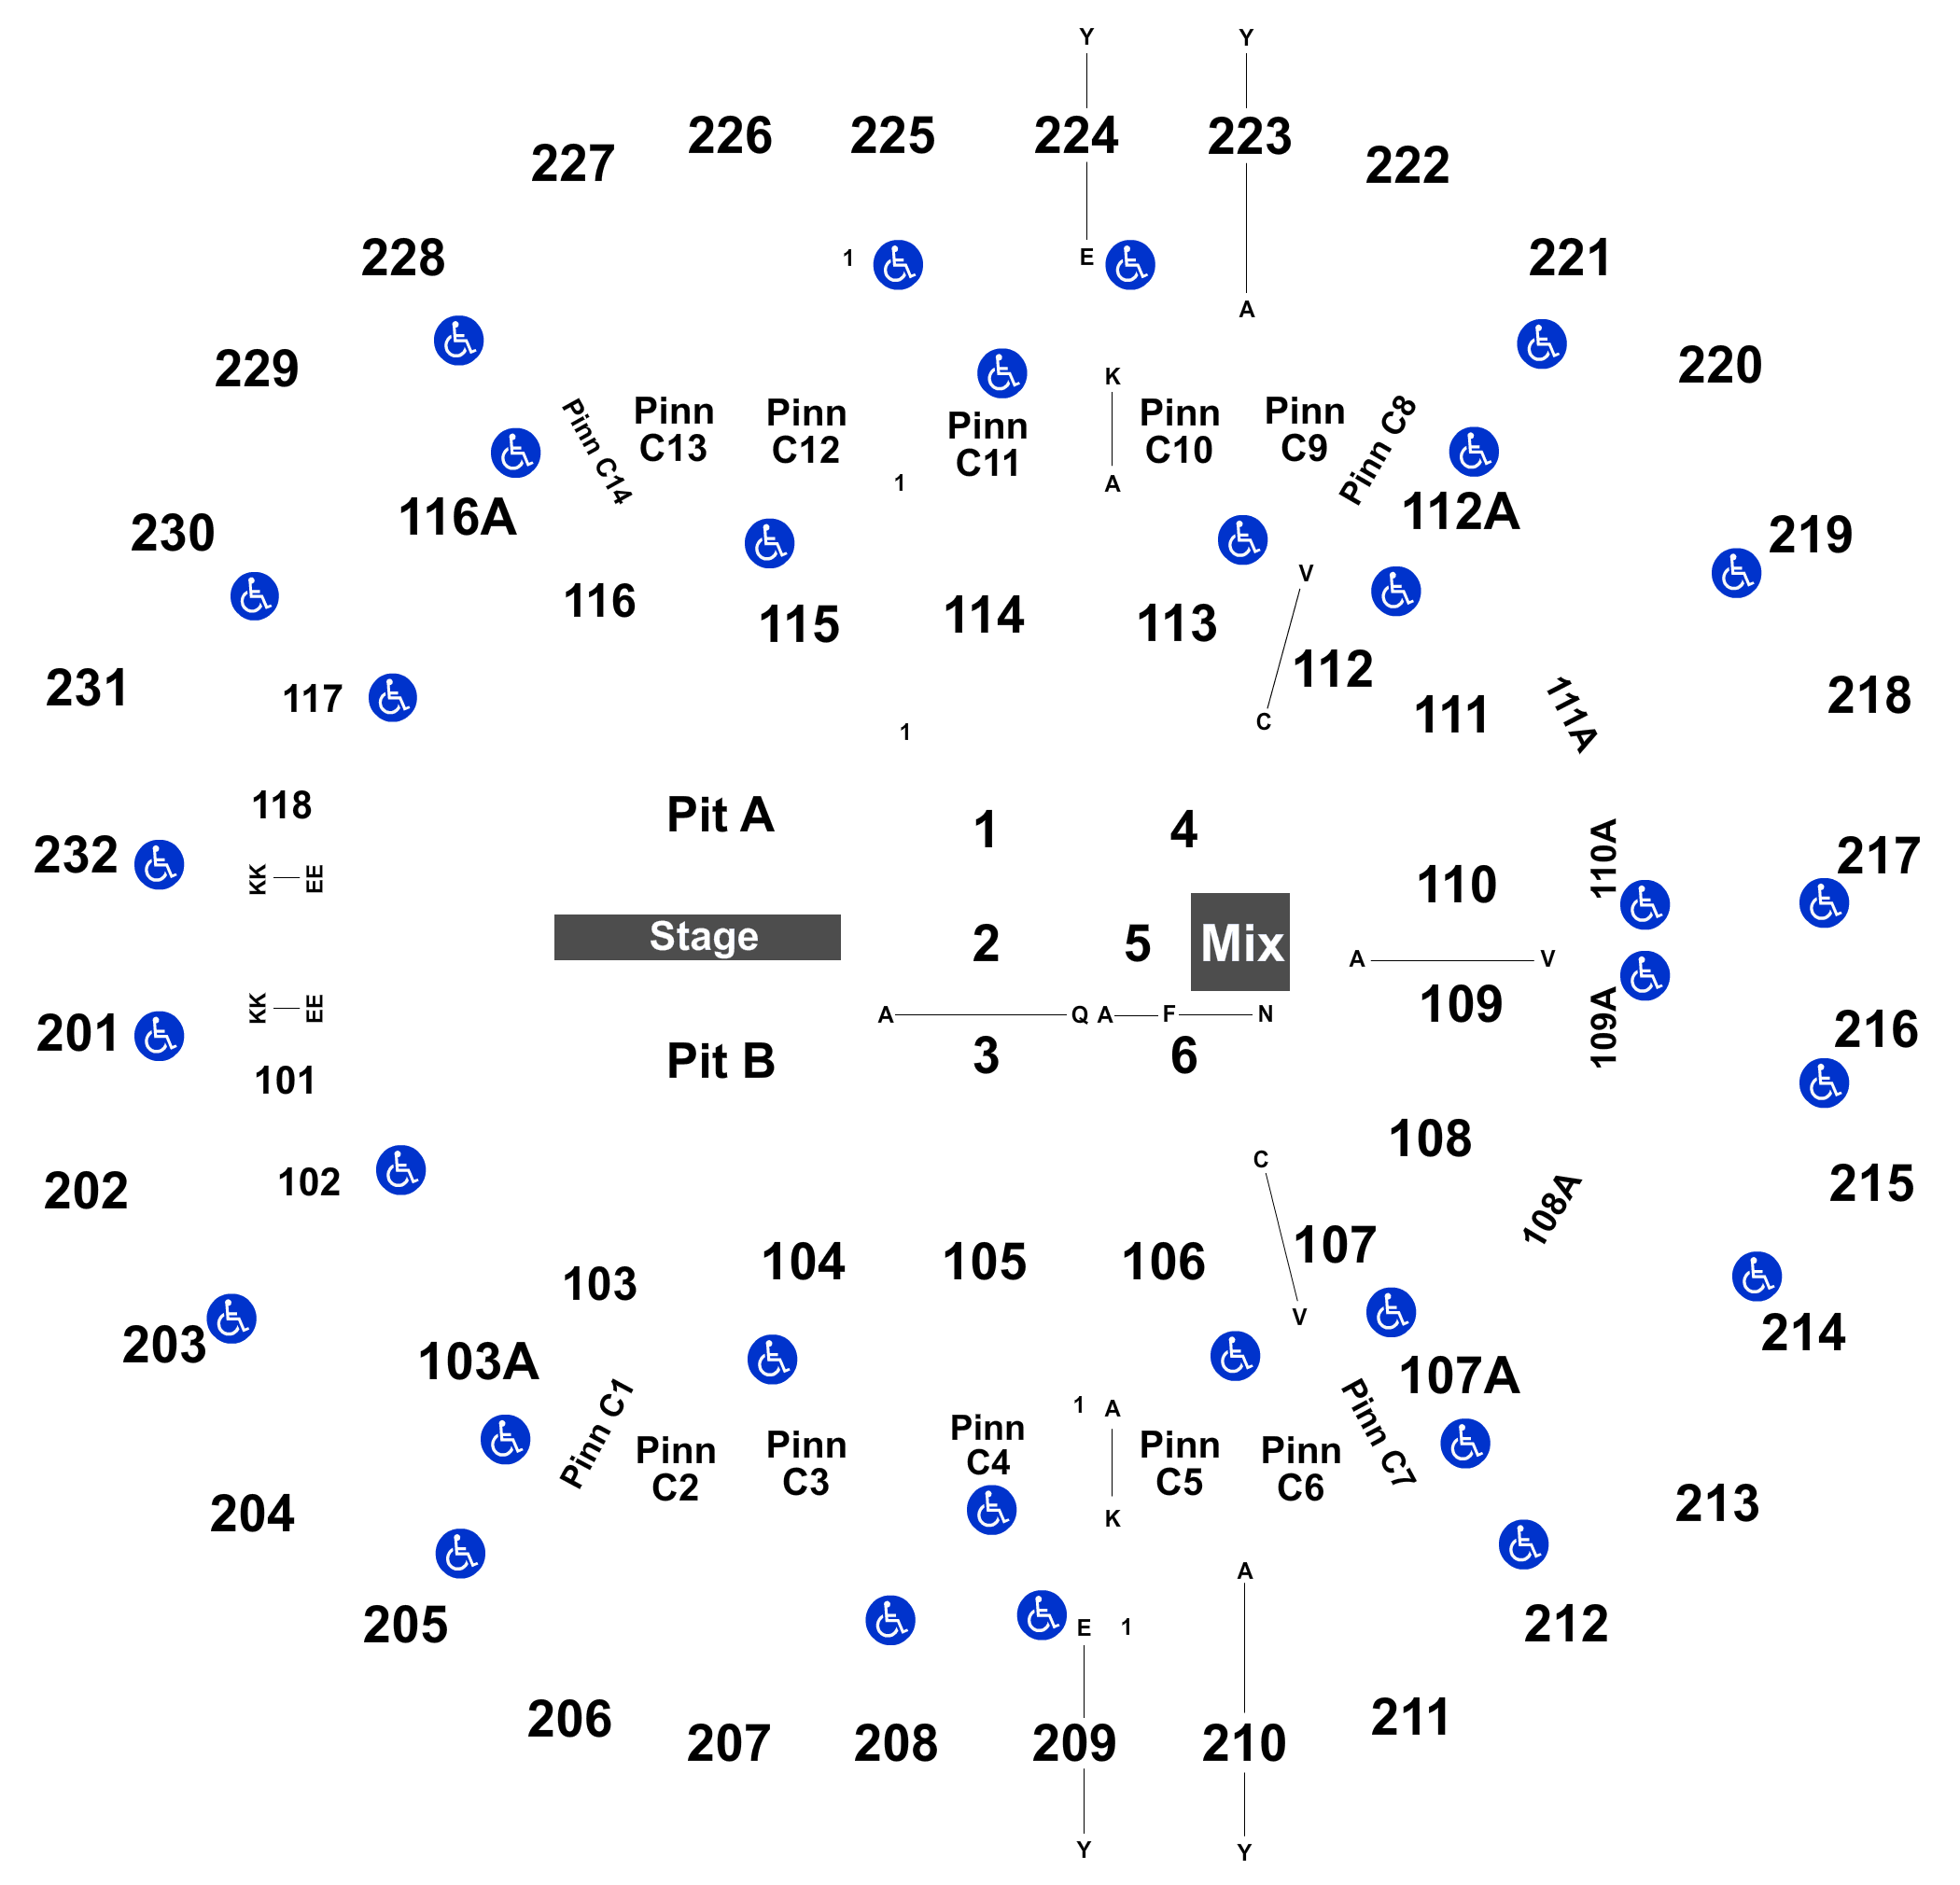 Fedex Forum Seating Chart 3d View